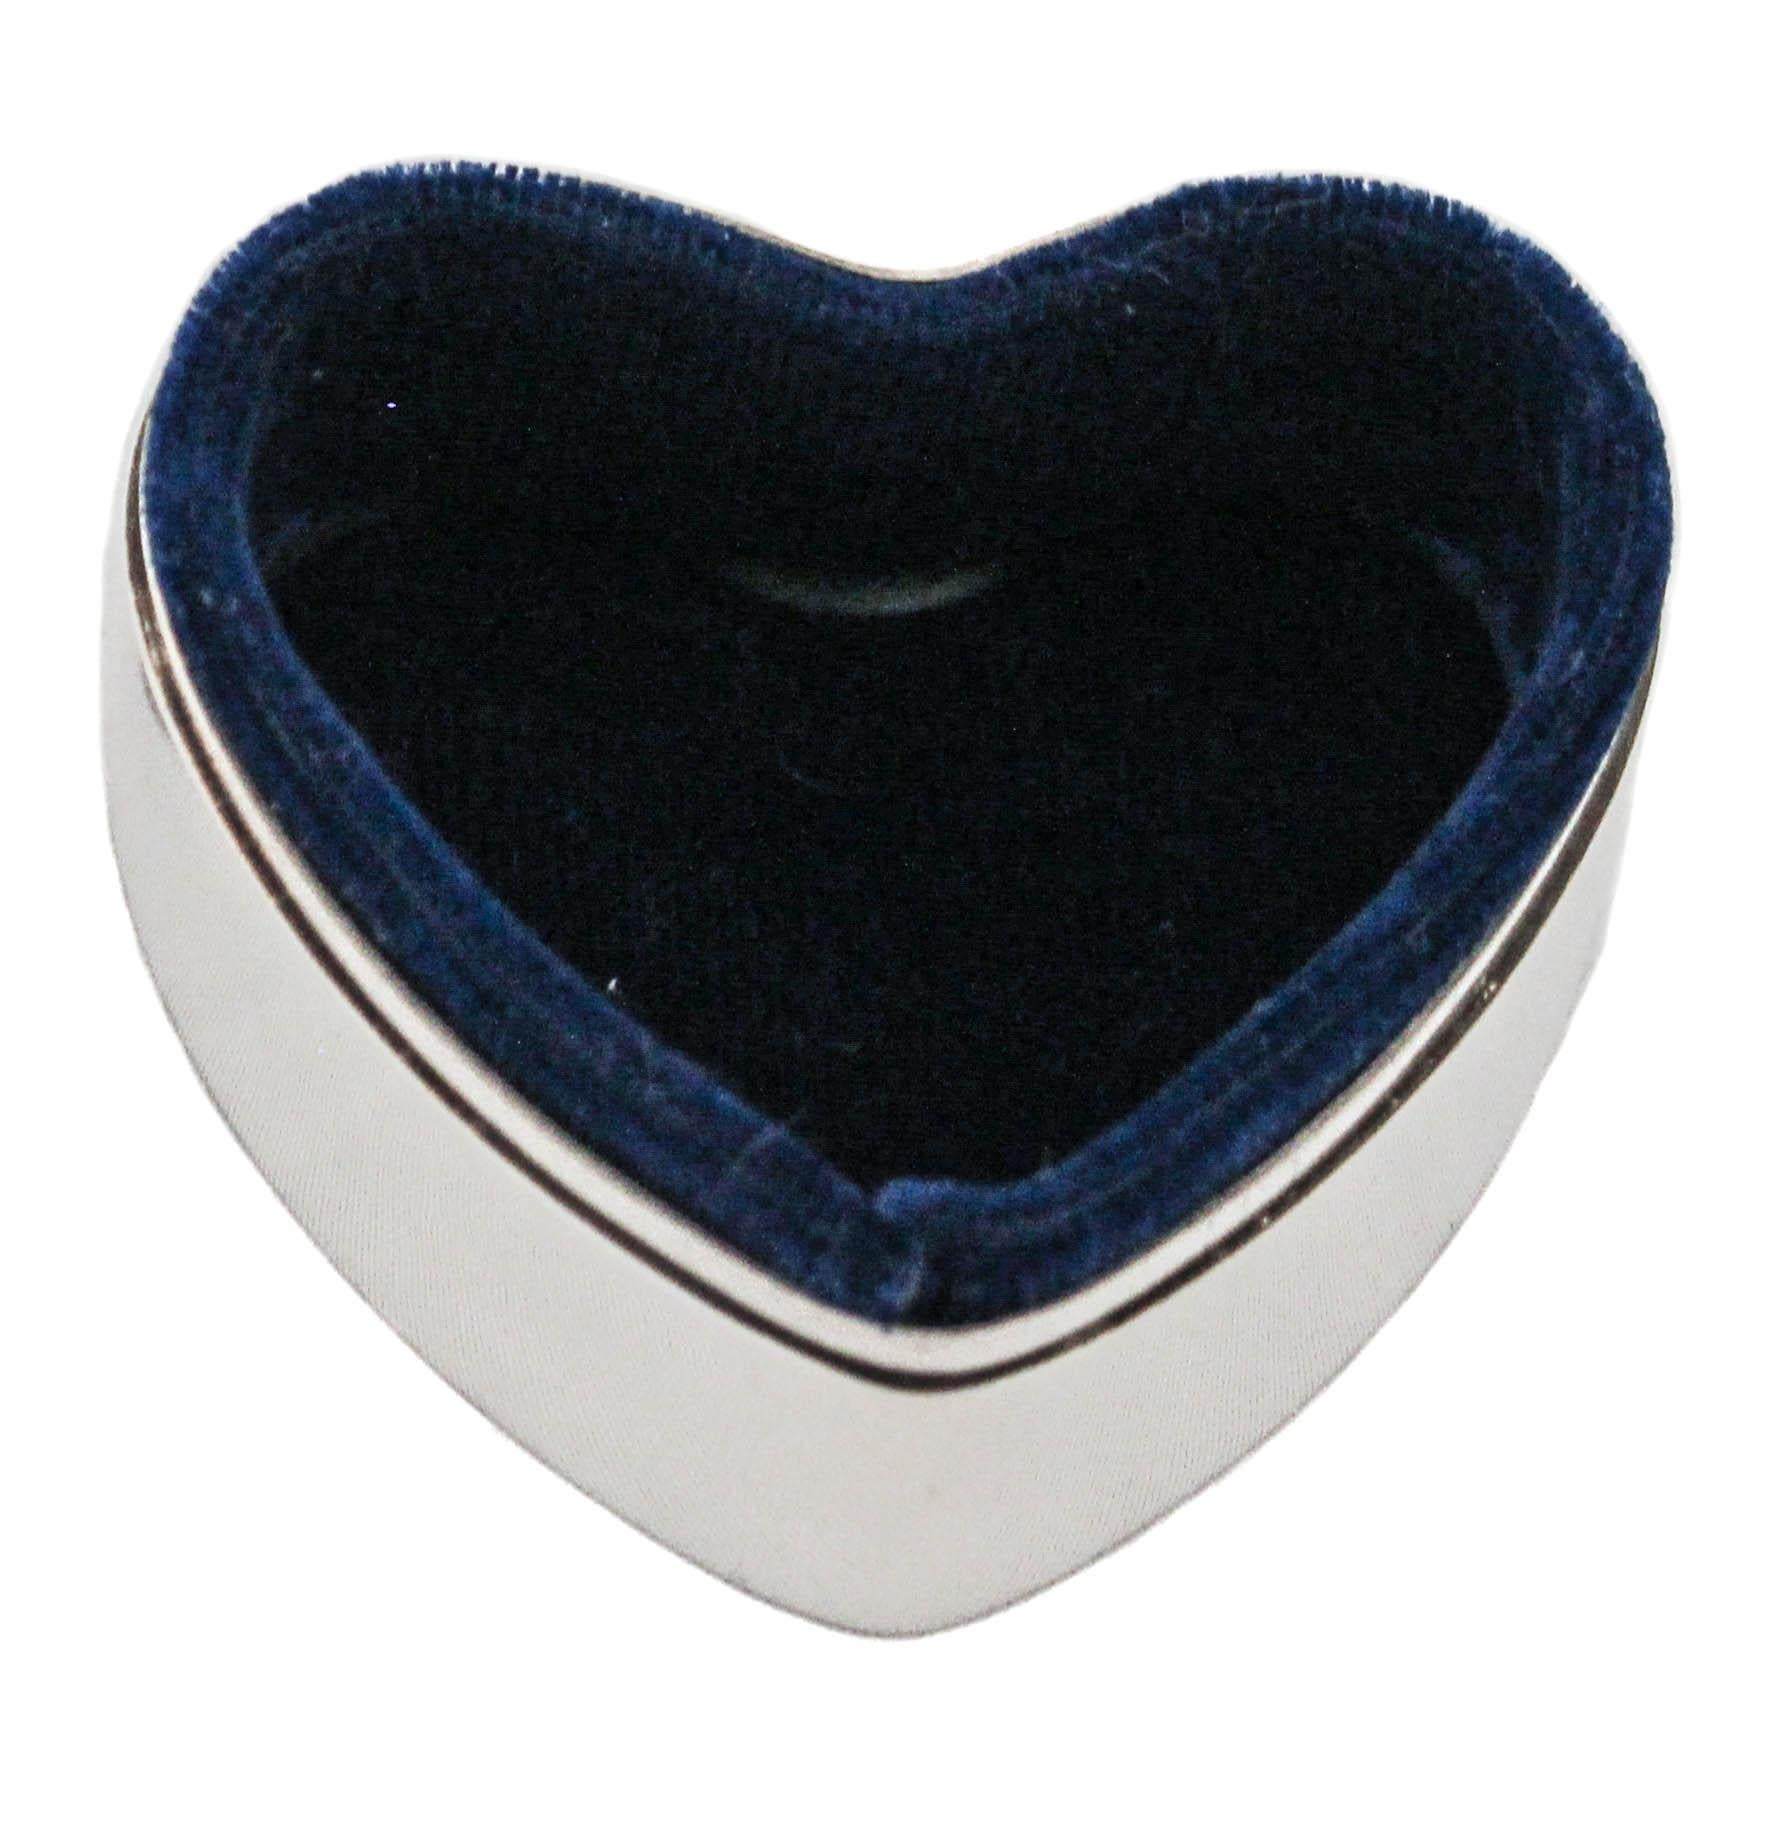 American Sterling Silver Heart Shaped Ring Box